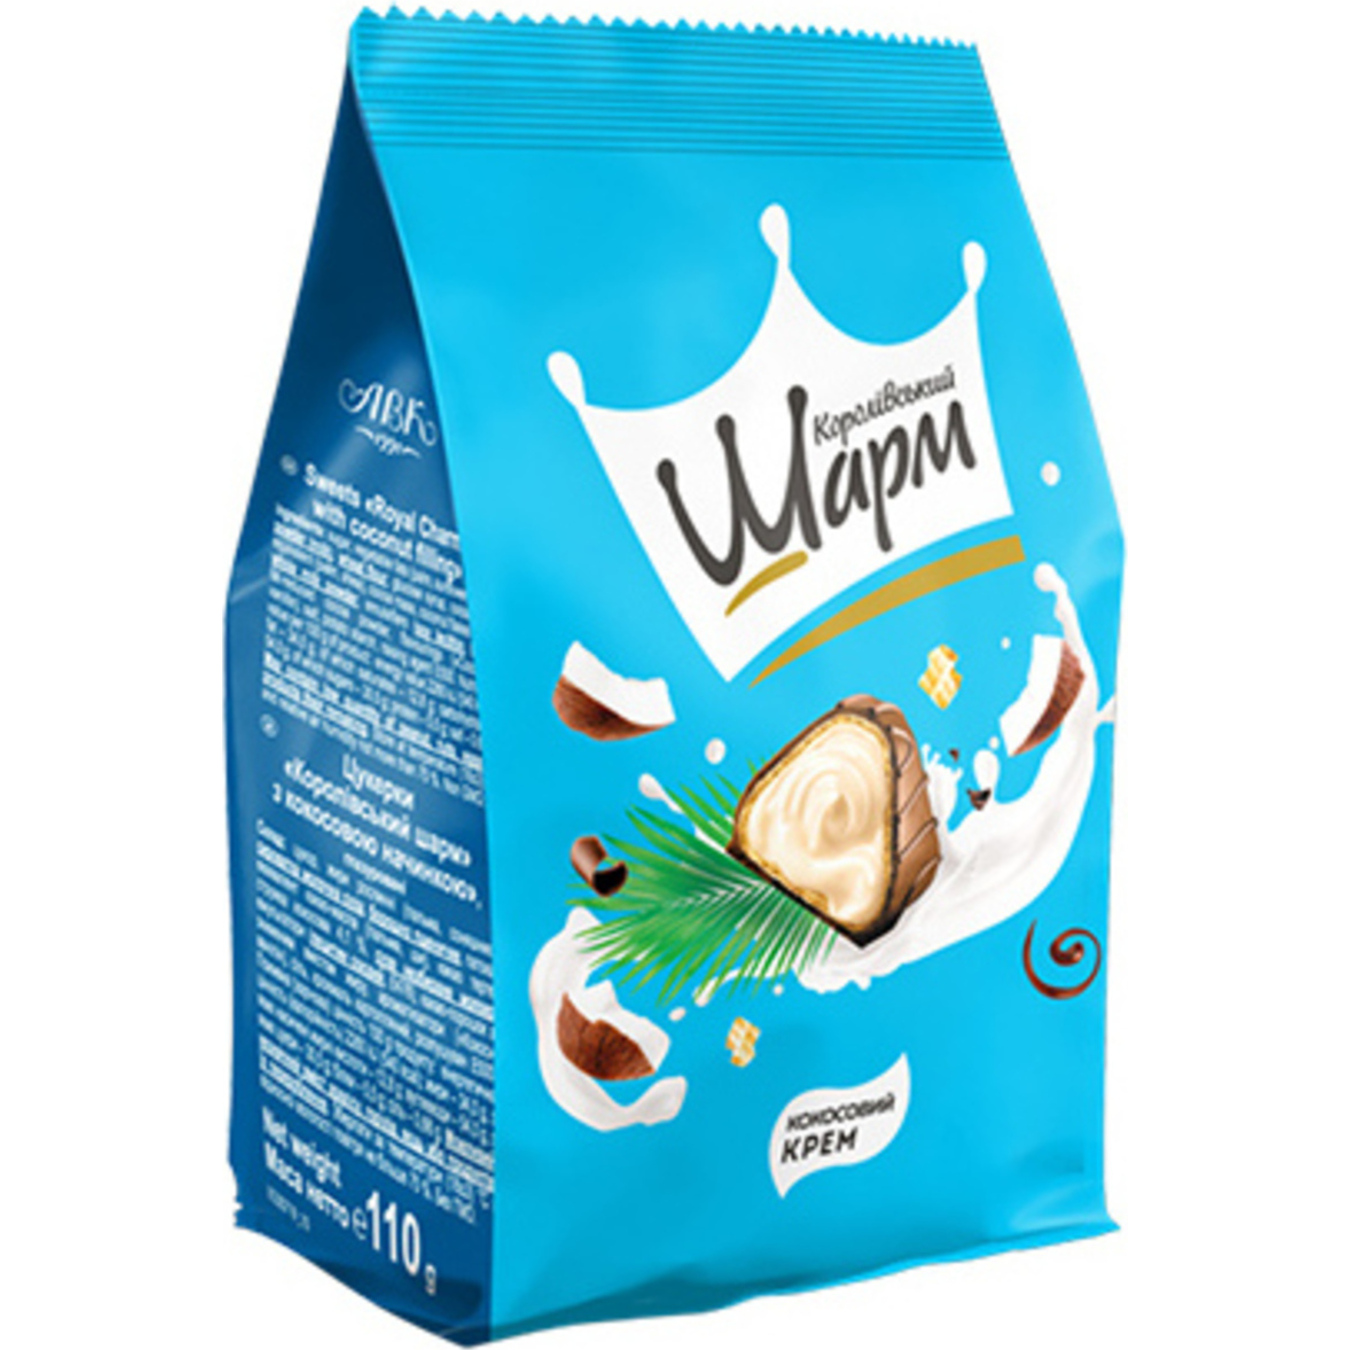 AVK Royal Charm Sweets with Coconut Filling 110g